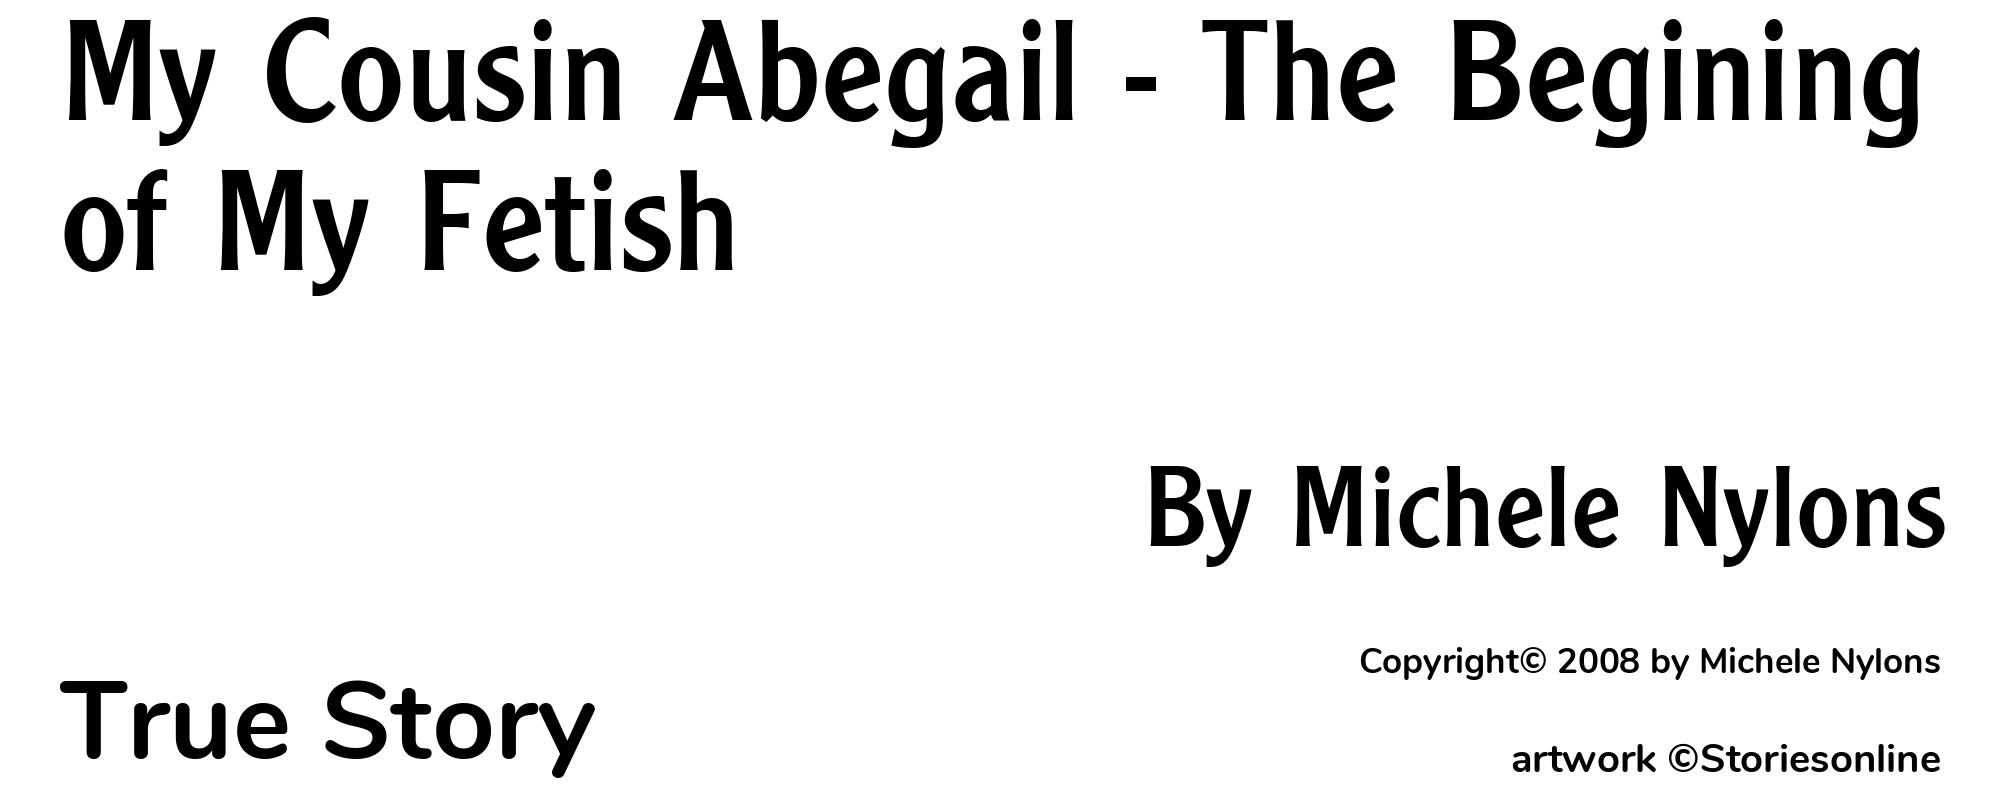 My Cousin Abegail - The Begining of My Fetish - Cover